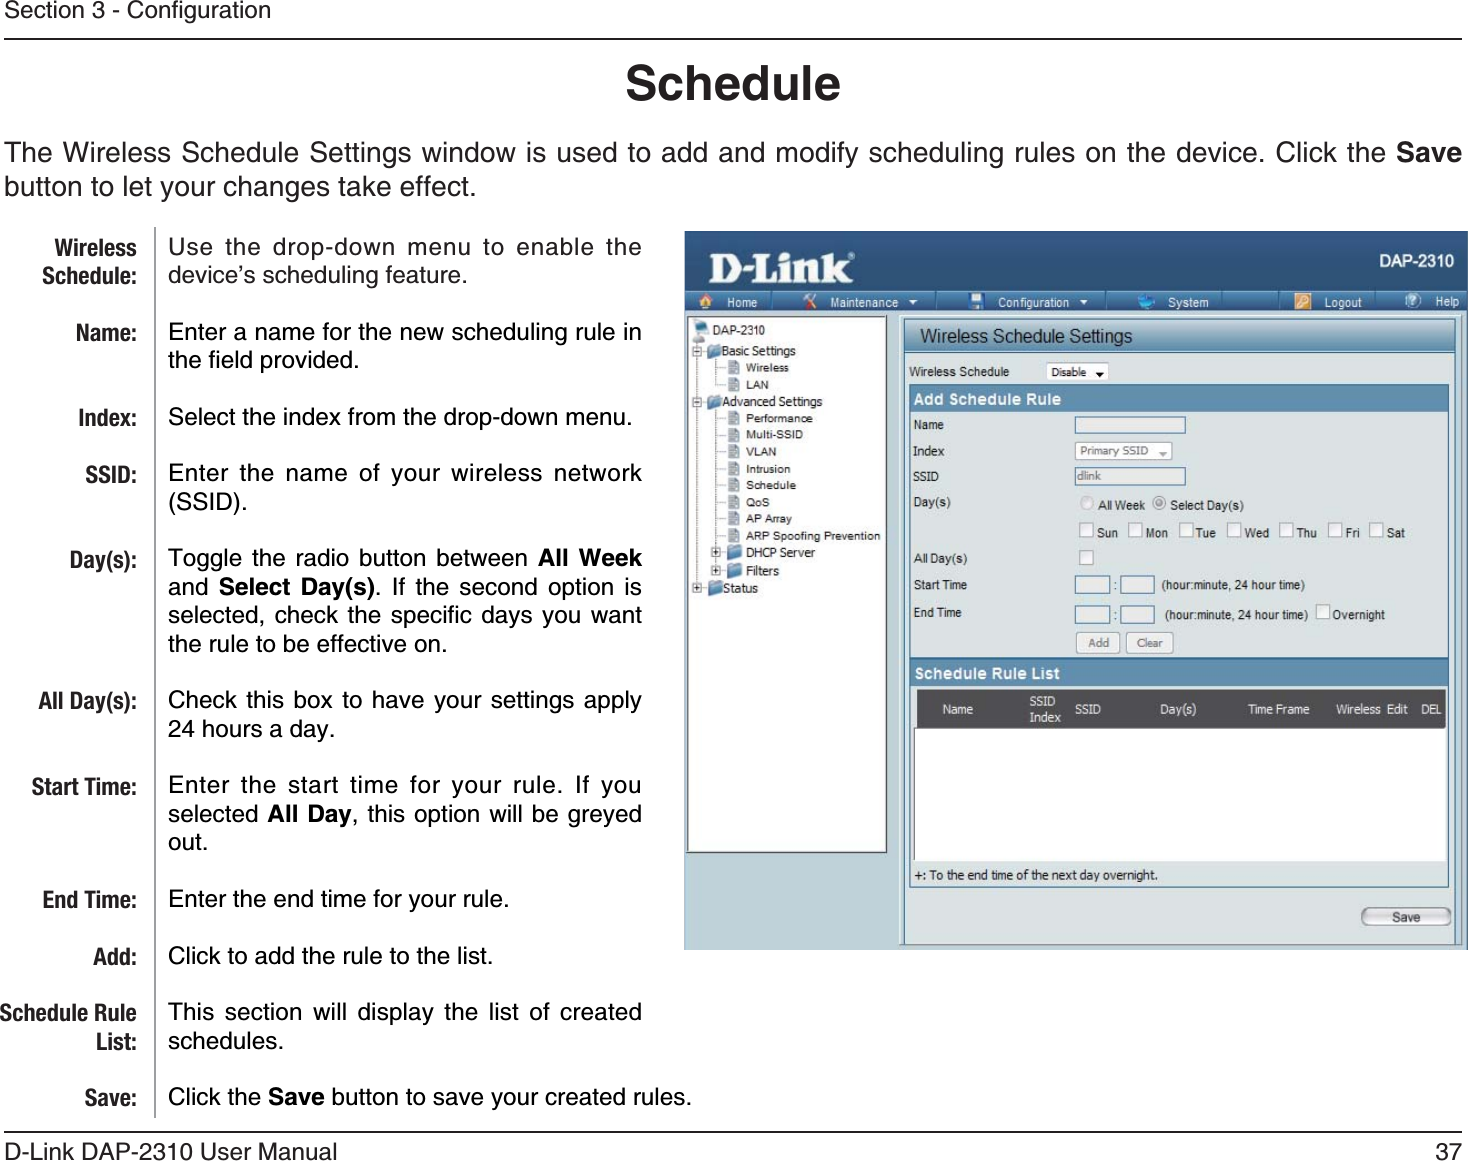 37D-Link DAP-2310 User ManualScheduleThe Wireless Schedule Settings window is used to add and modify scheduling rules on the device. Click the Save button to let your changes take effect.Use the drop-down menu to enable the device’s scheduling feature. Enter a name for the new scheduling rule in Select the index from the drop-down menu.Enter the name of your wireless network Toggle the radio button between All Week and  Select Day(s). If the second option is   the rule to be effective on.Check this box to have your settings apply 24 hours a day.Enter the start time for your rule. If you selected All Day, this option will be greyed out.Enter the end time for your rule.Click to add the rule to the list. This section will display the list of created schedules.Click the Save button to save your created rules.WirelessSchedule:Name:Index:SSID:Day(s):All Day(s):Start Time:End Time:Add:Schedule Rule List:Save: